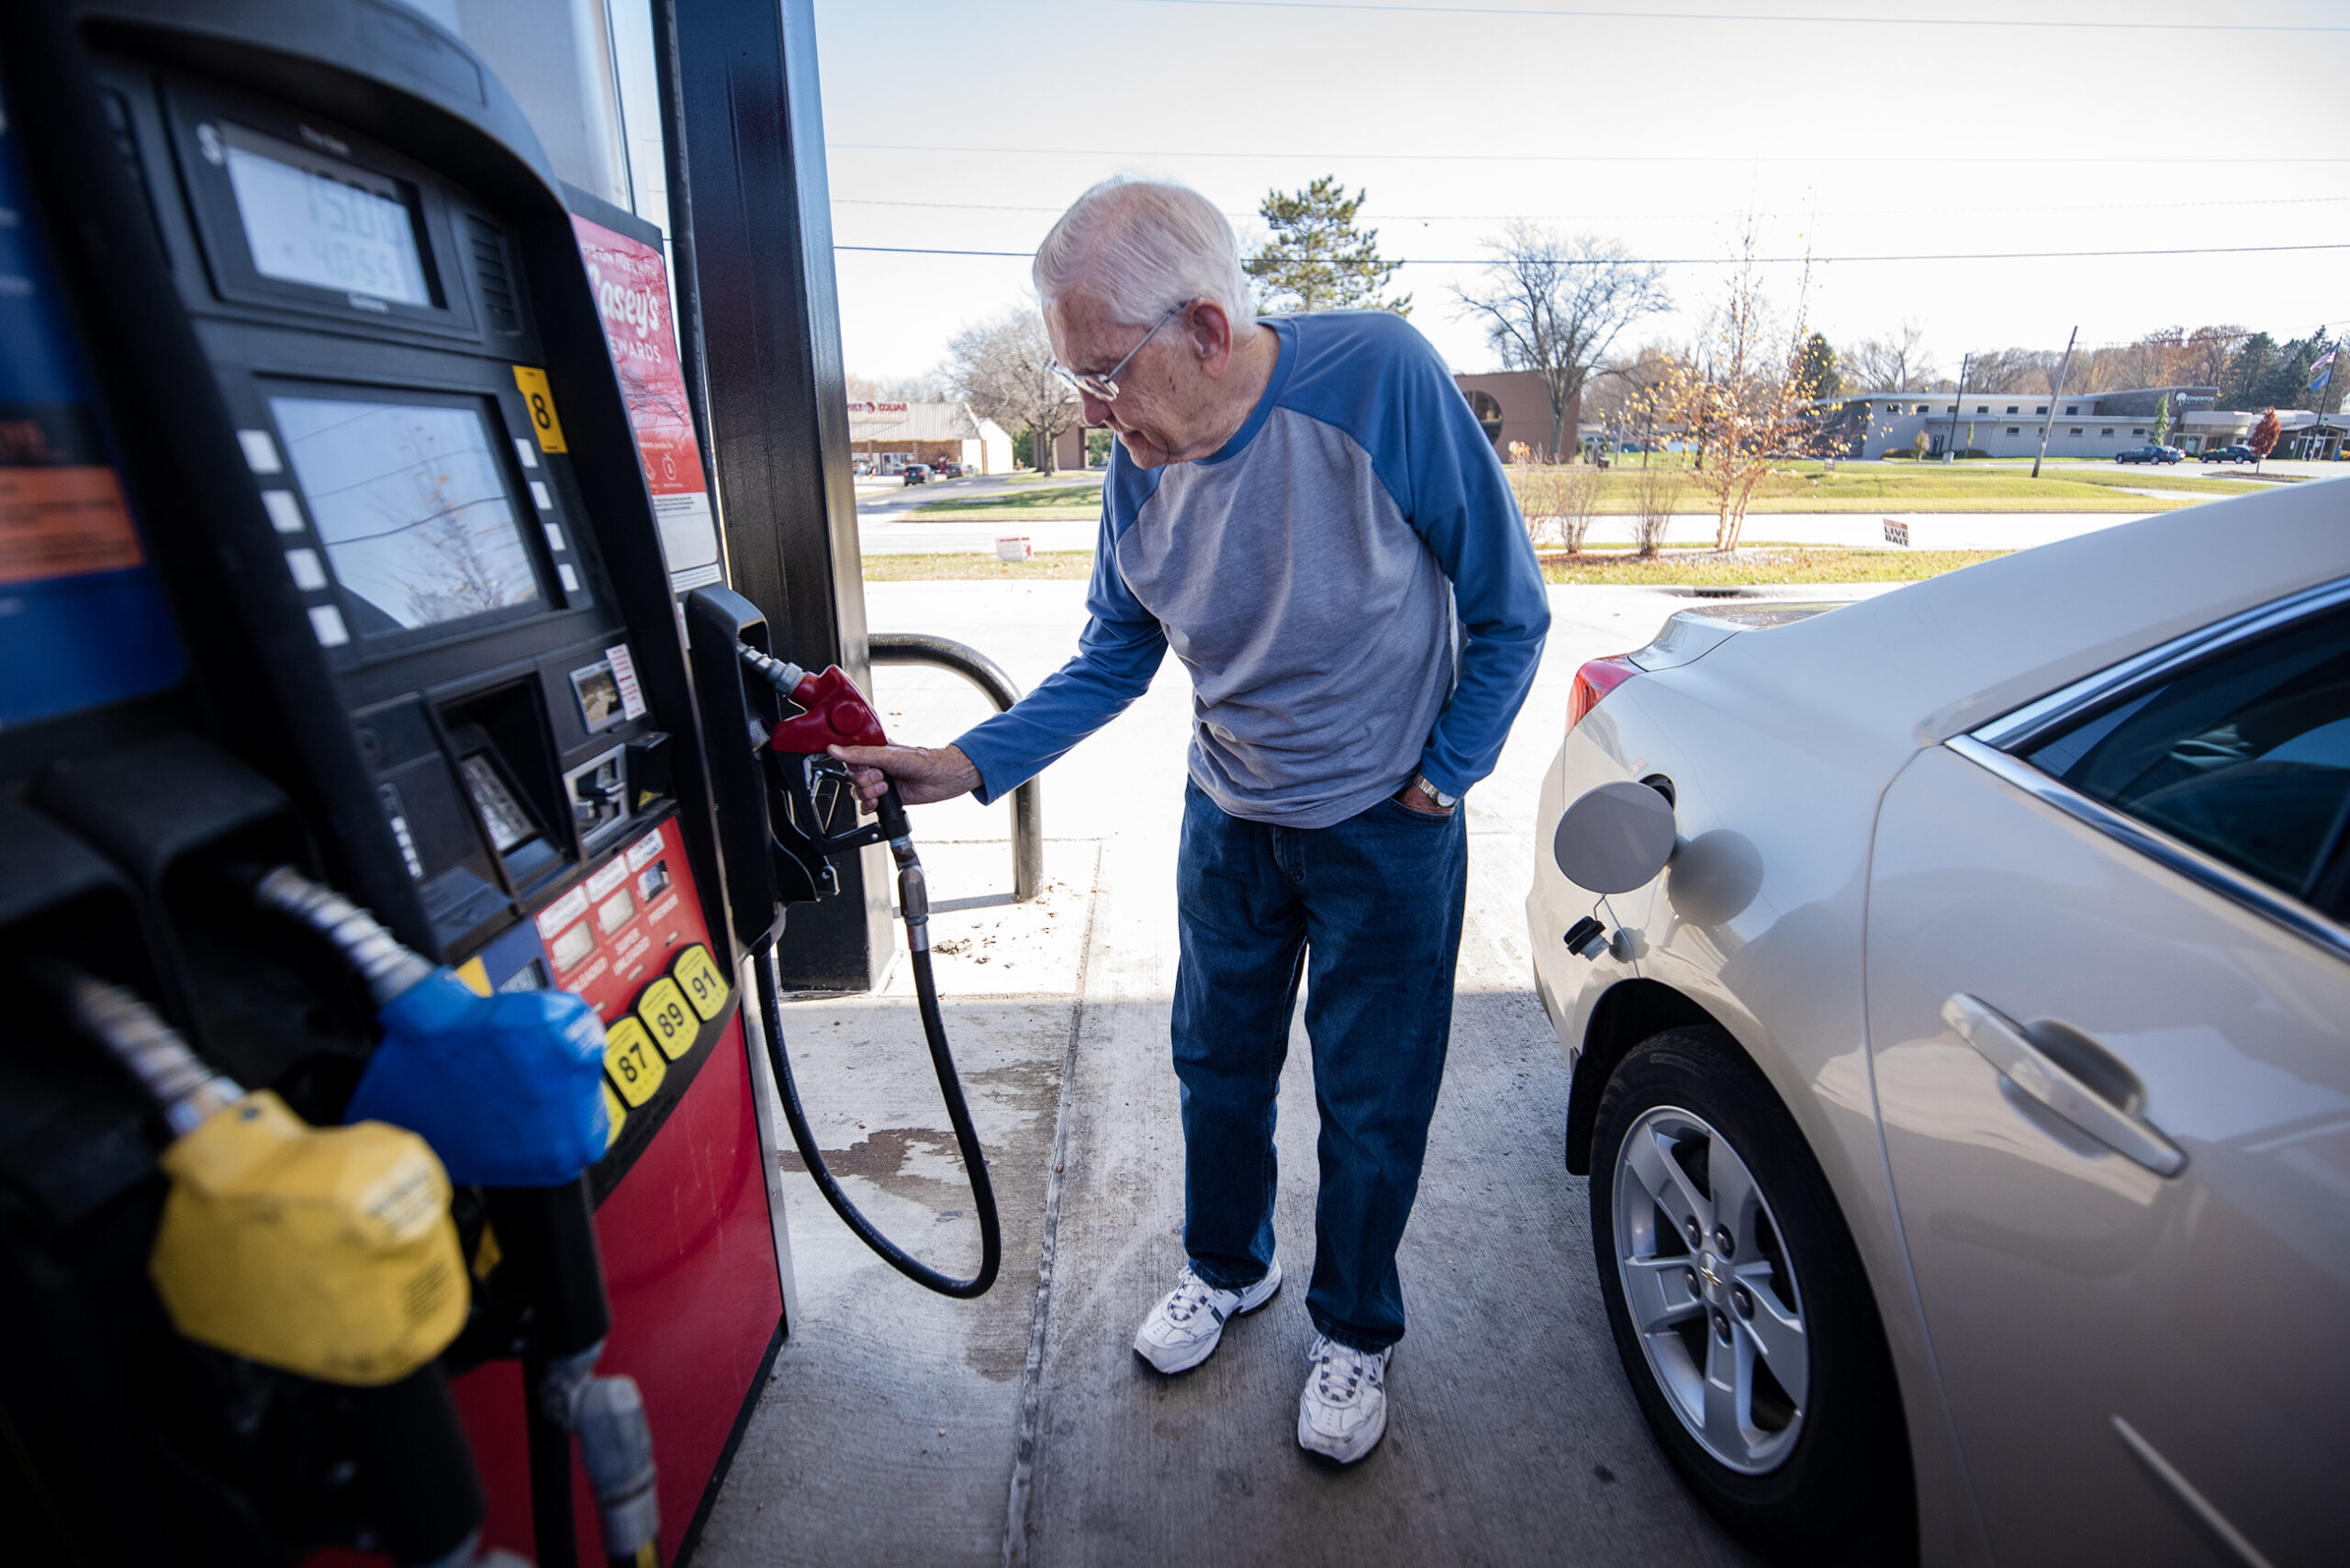 Gas in Wisconsin is cheaper than $3 per gallon, but not diesel